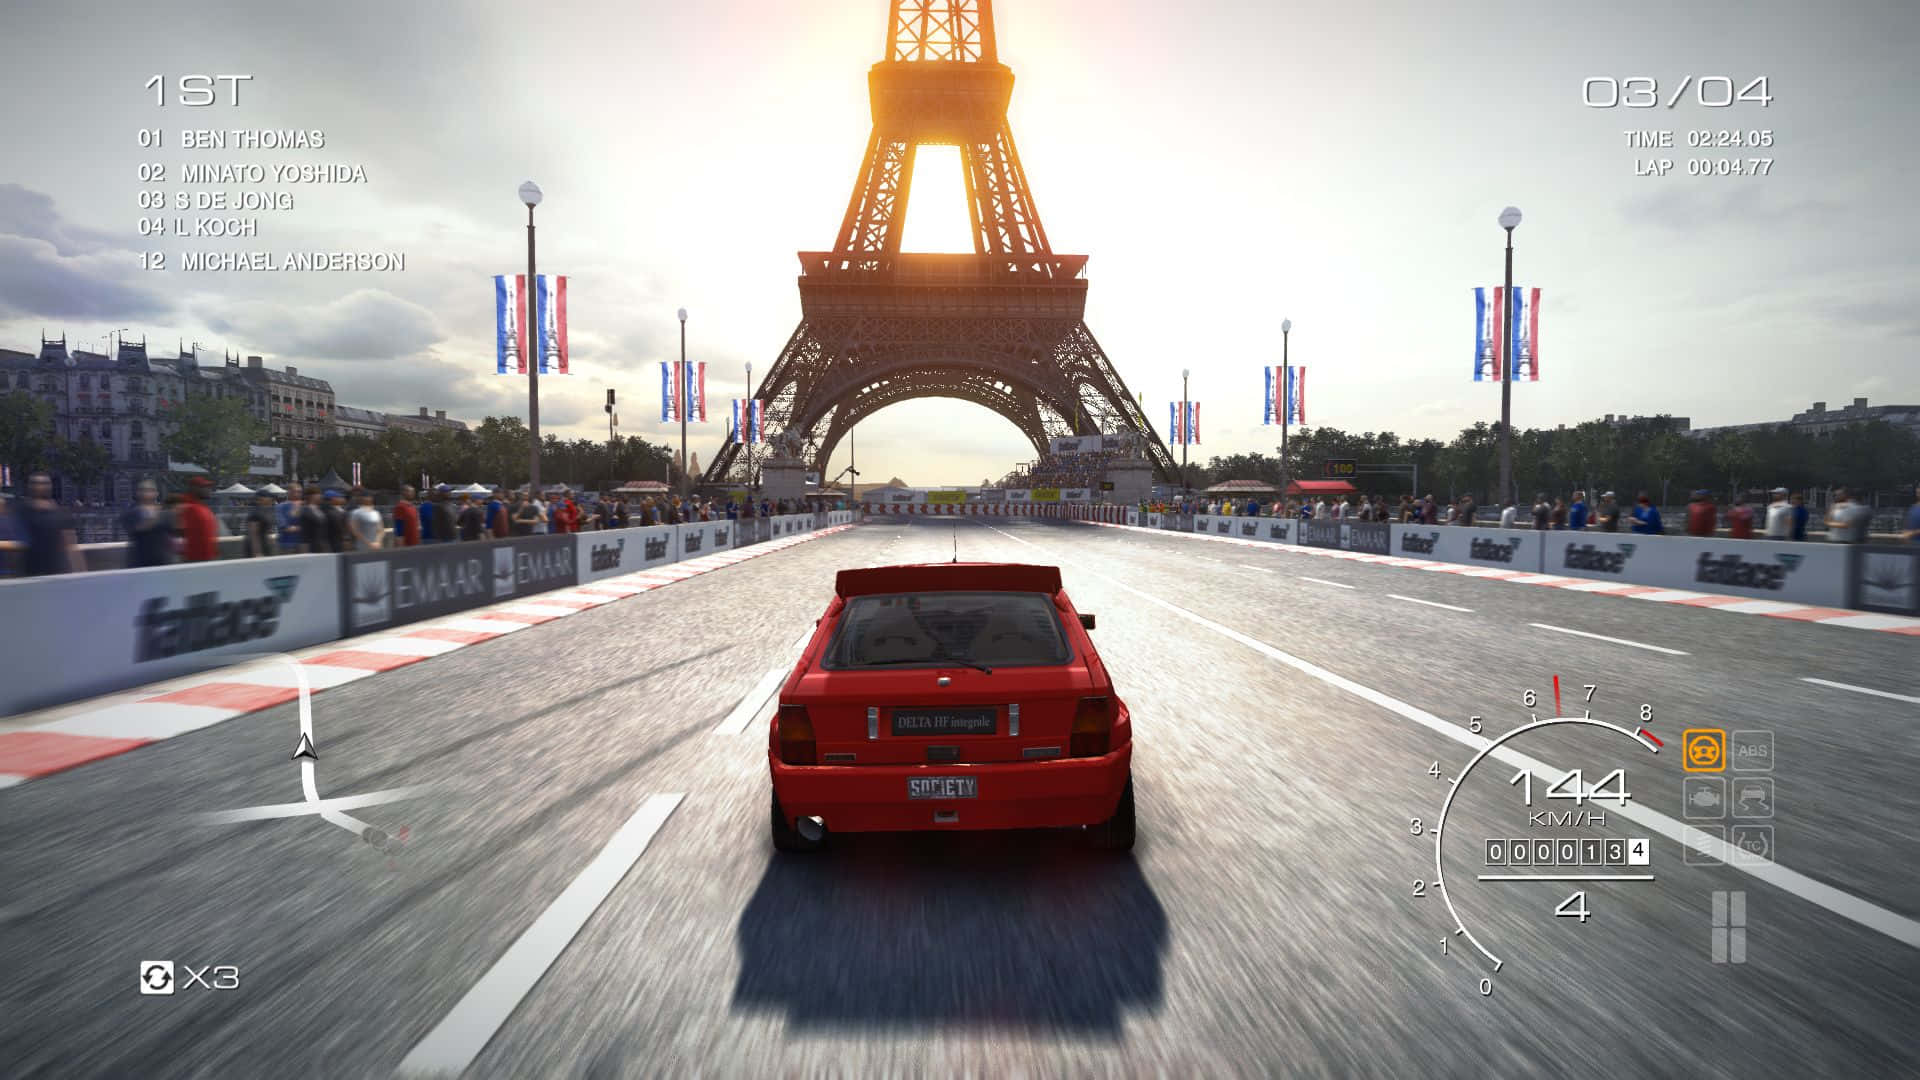 A Red Car Driving Down A Street With The Eiffel Tower In The Background